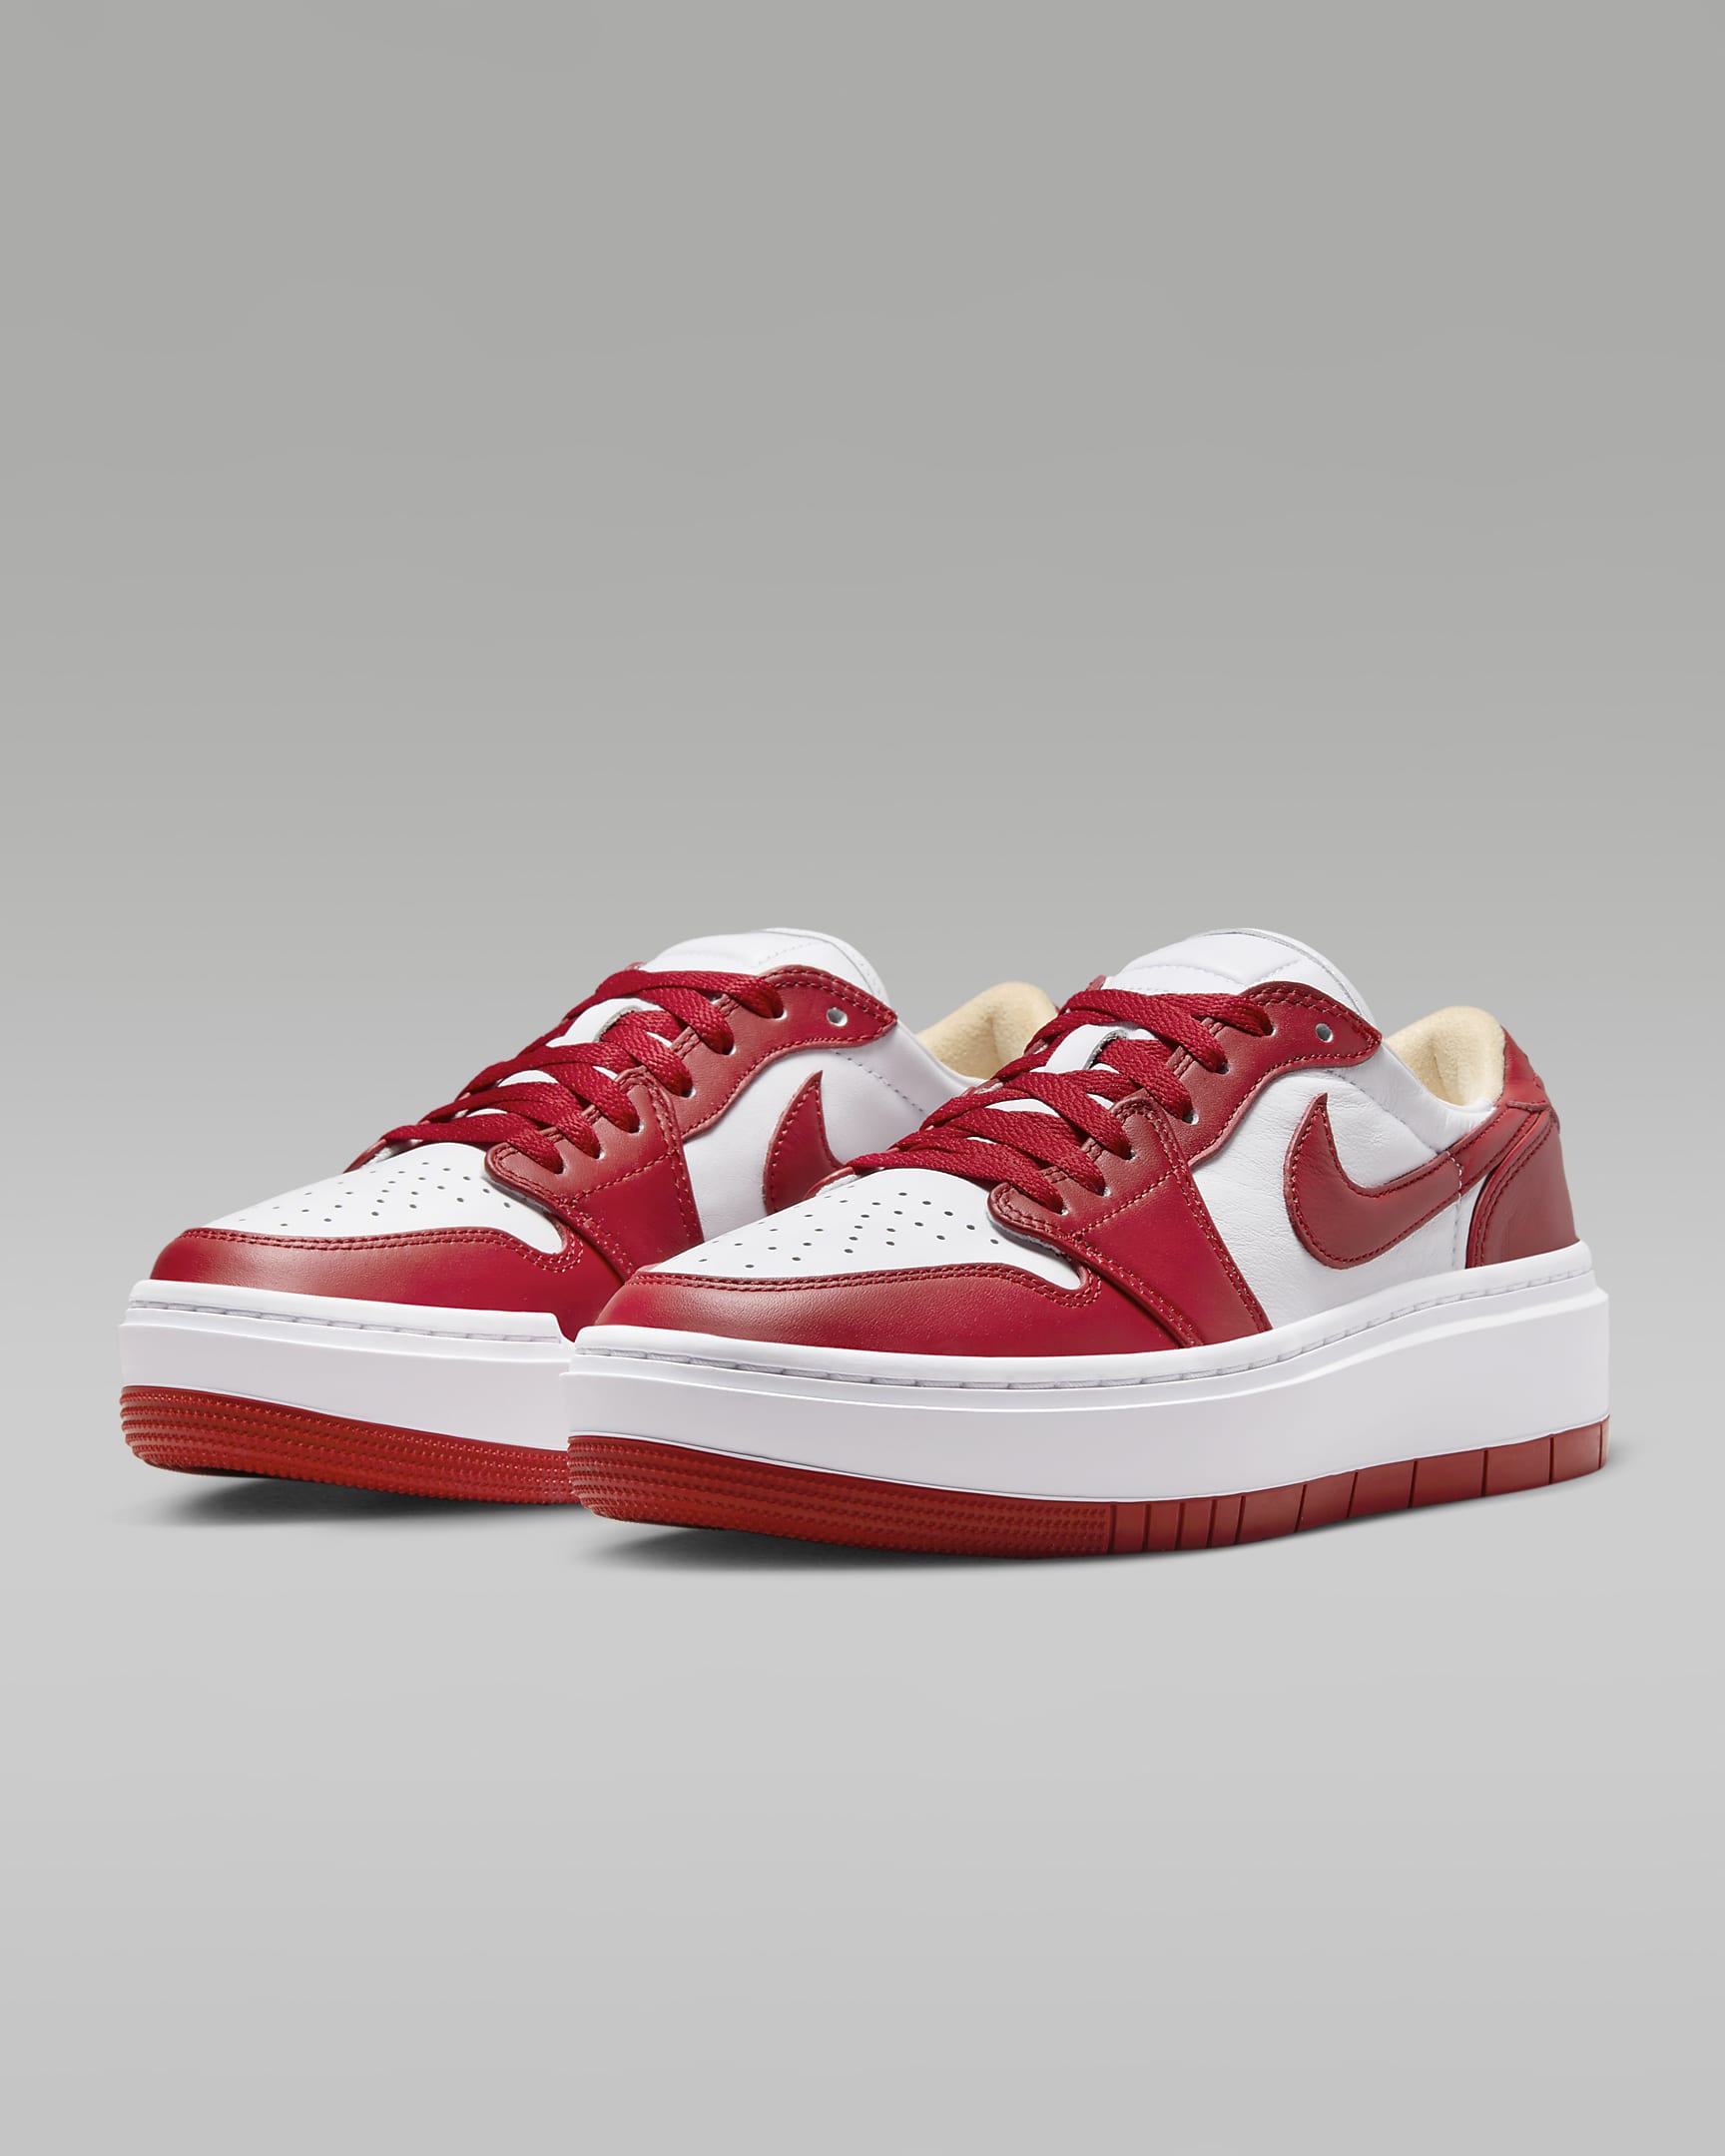 Air Jordan 1 Elevate Low Women's Shoes - White/White/Fire Red